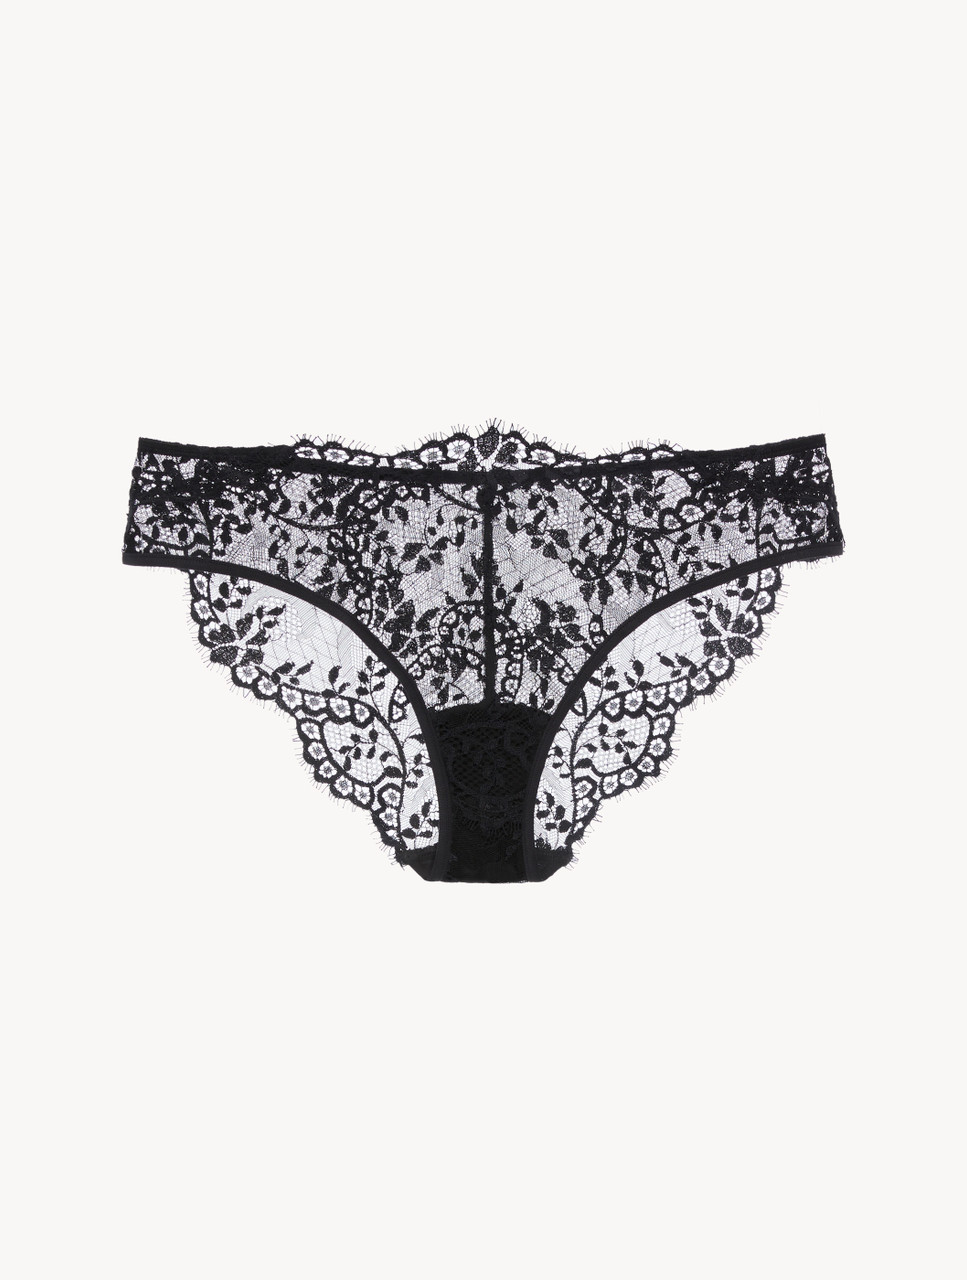 LA PERLA on X: Beautifully crafted from intricate Leavers Lace